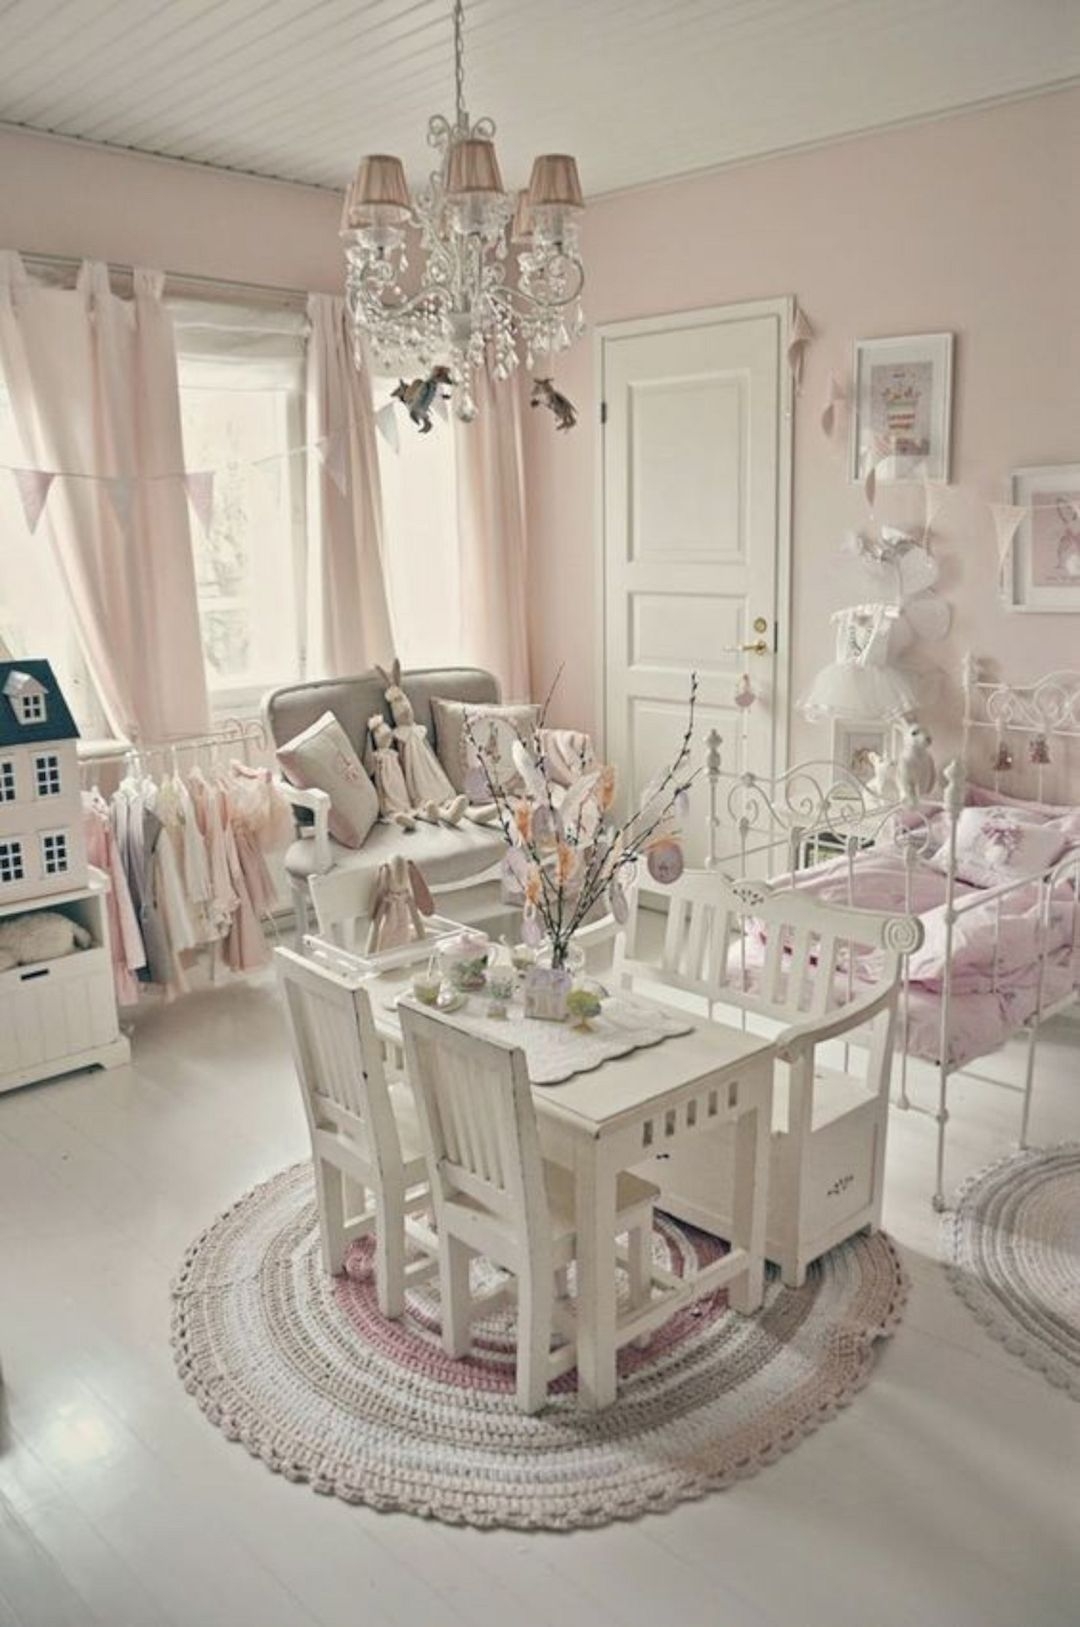 table for girls room